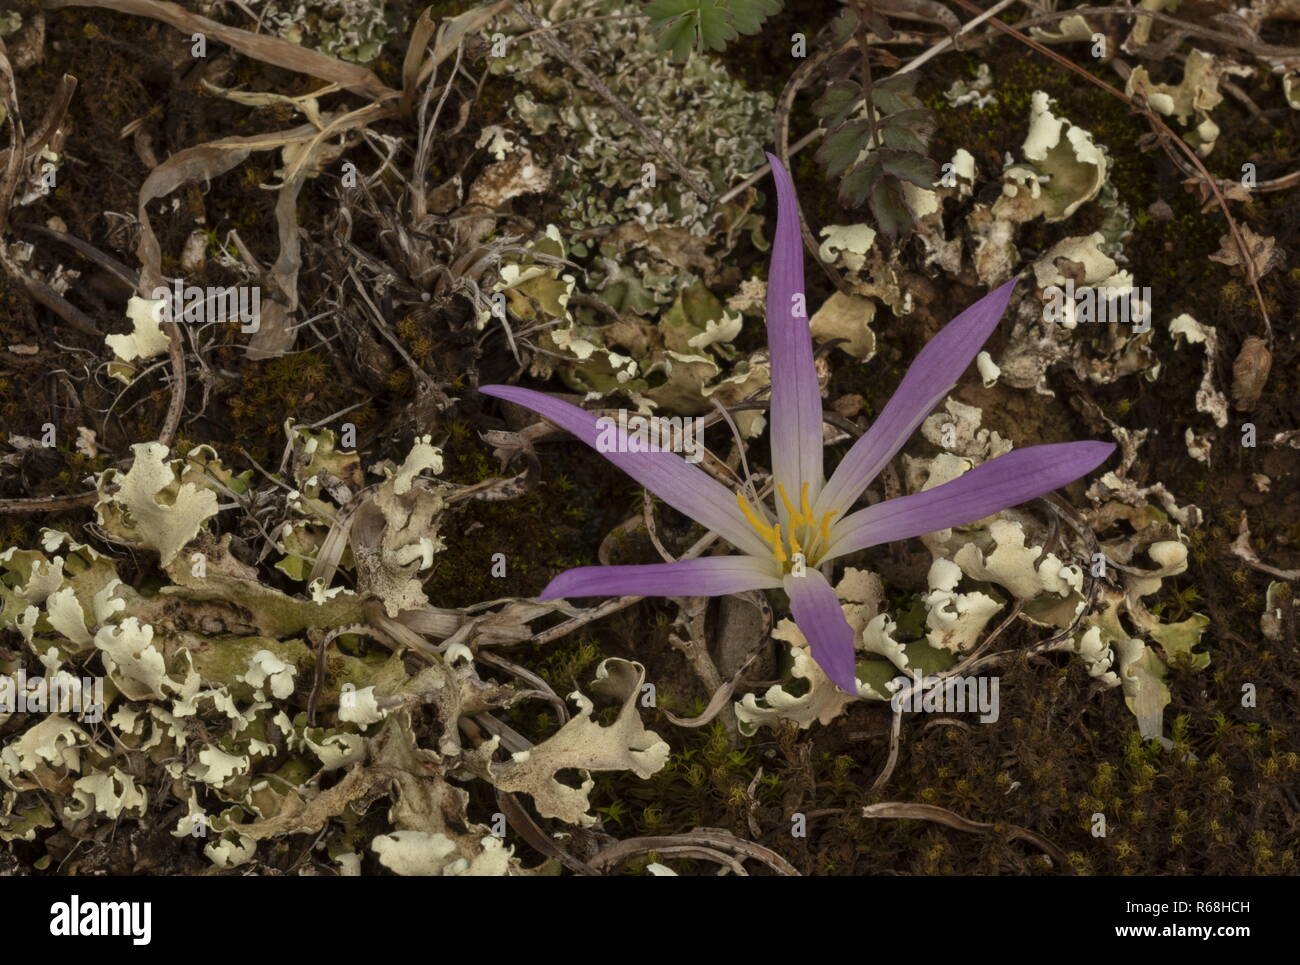 Pyrenean Merendera, Colchicum montanum, in flower among lichens in autumn in the Spanish Pyrenees. Stock Photo